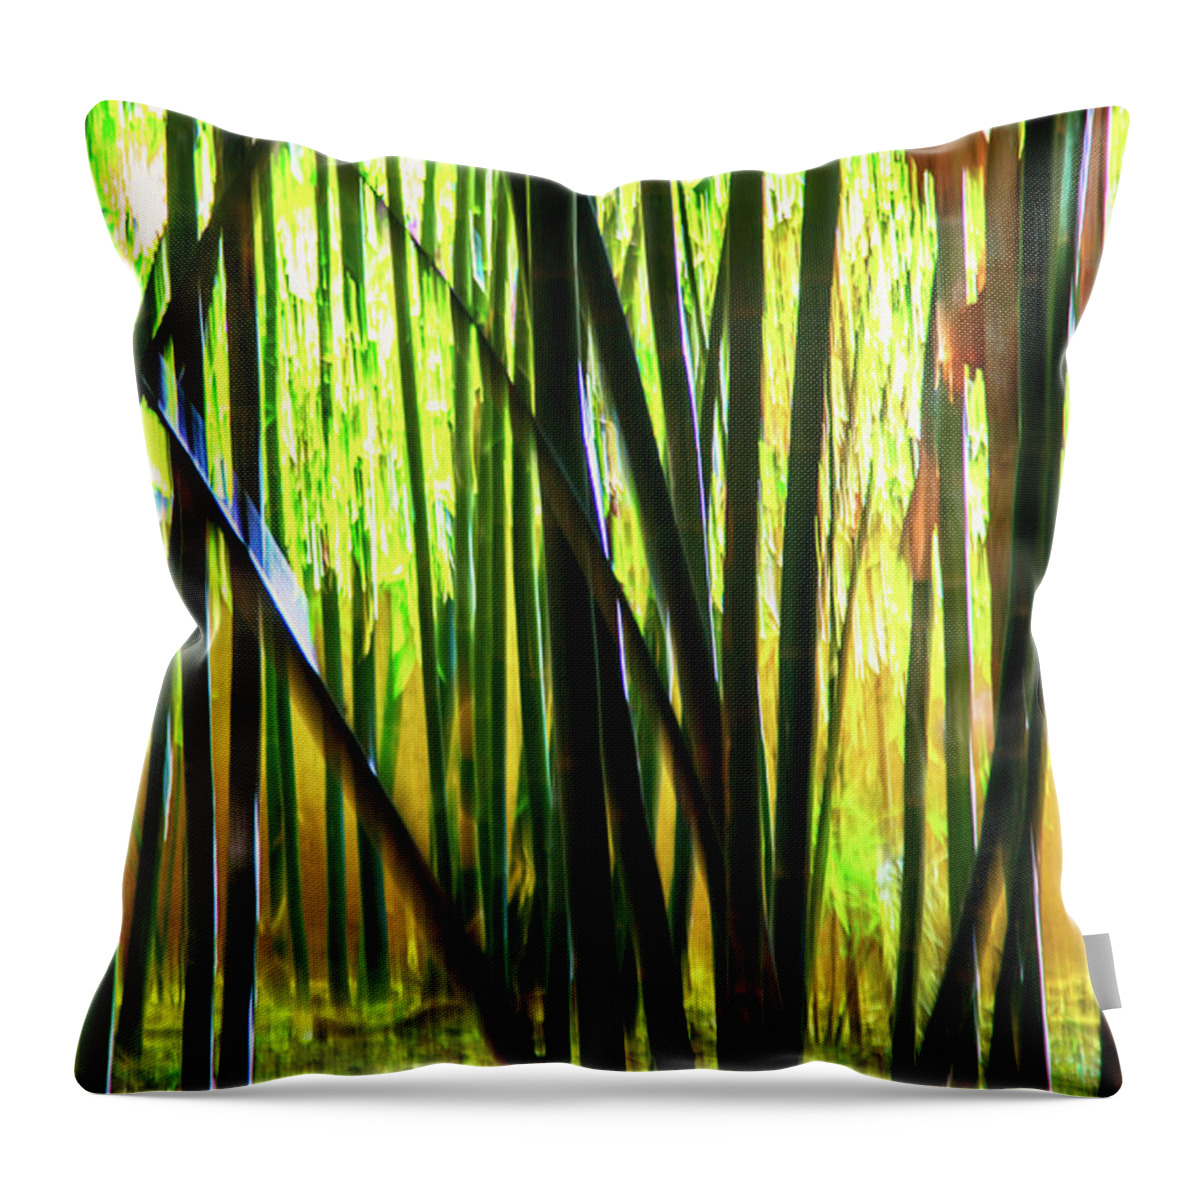 Bamboo Throw Pillow featuring the photograph Welcome to the Bamboo Jungle by Rene Triay FineArt Photos